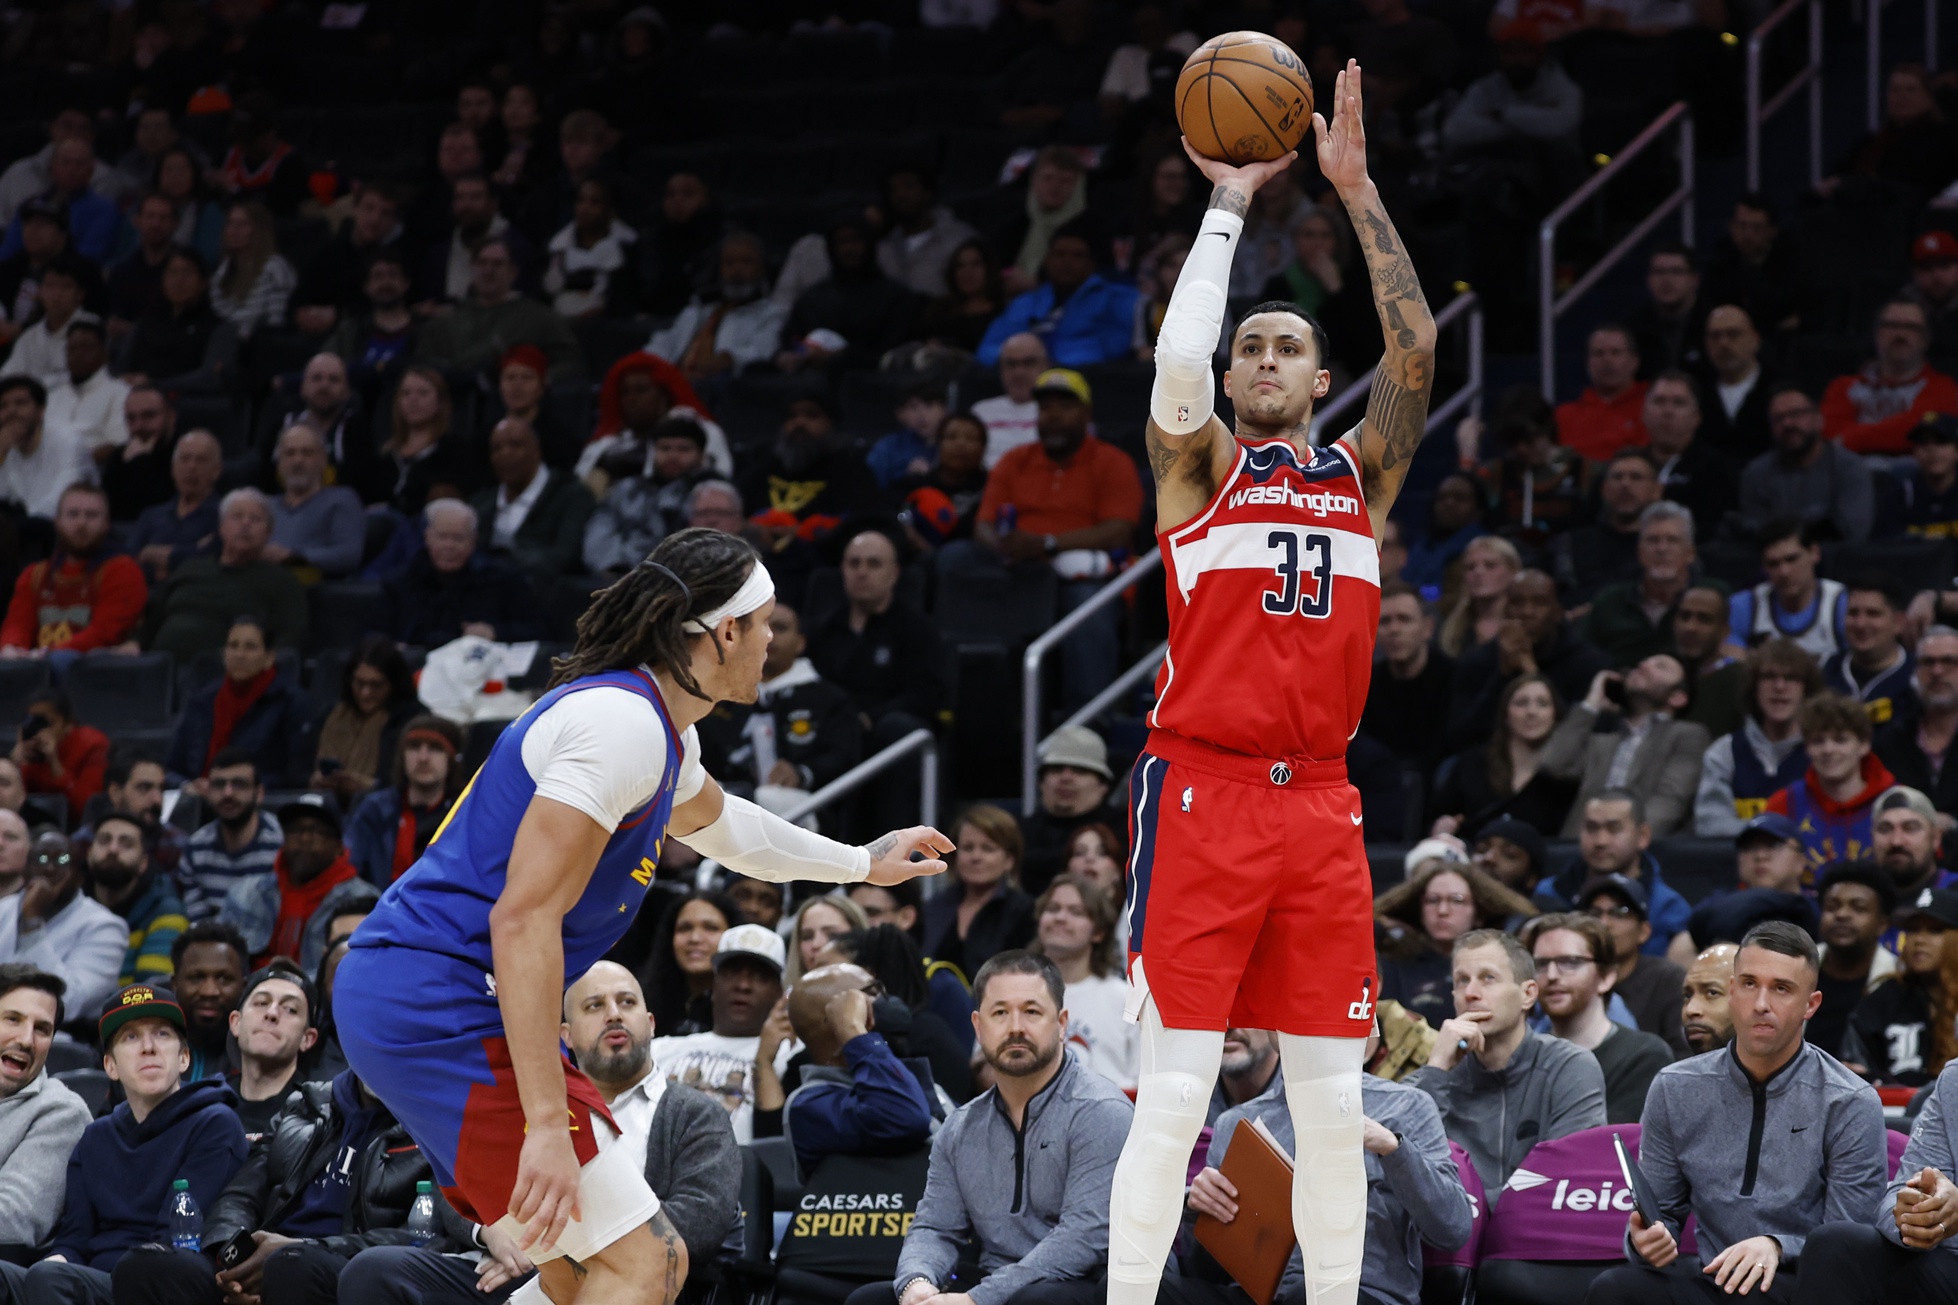 Washington Wizards forward Kyle Kuzma (33) shoots the ball as Denver Nuggets forward Aaron Gordon (50) defends in the second half at Capital One Arena.